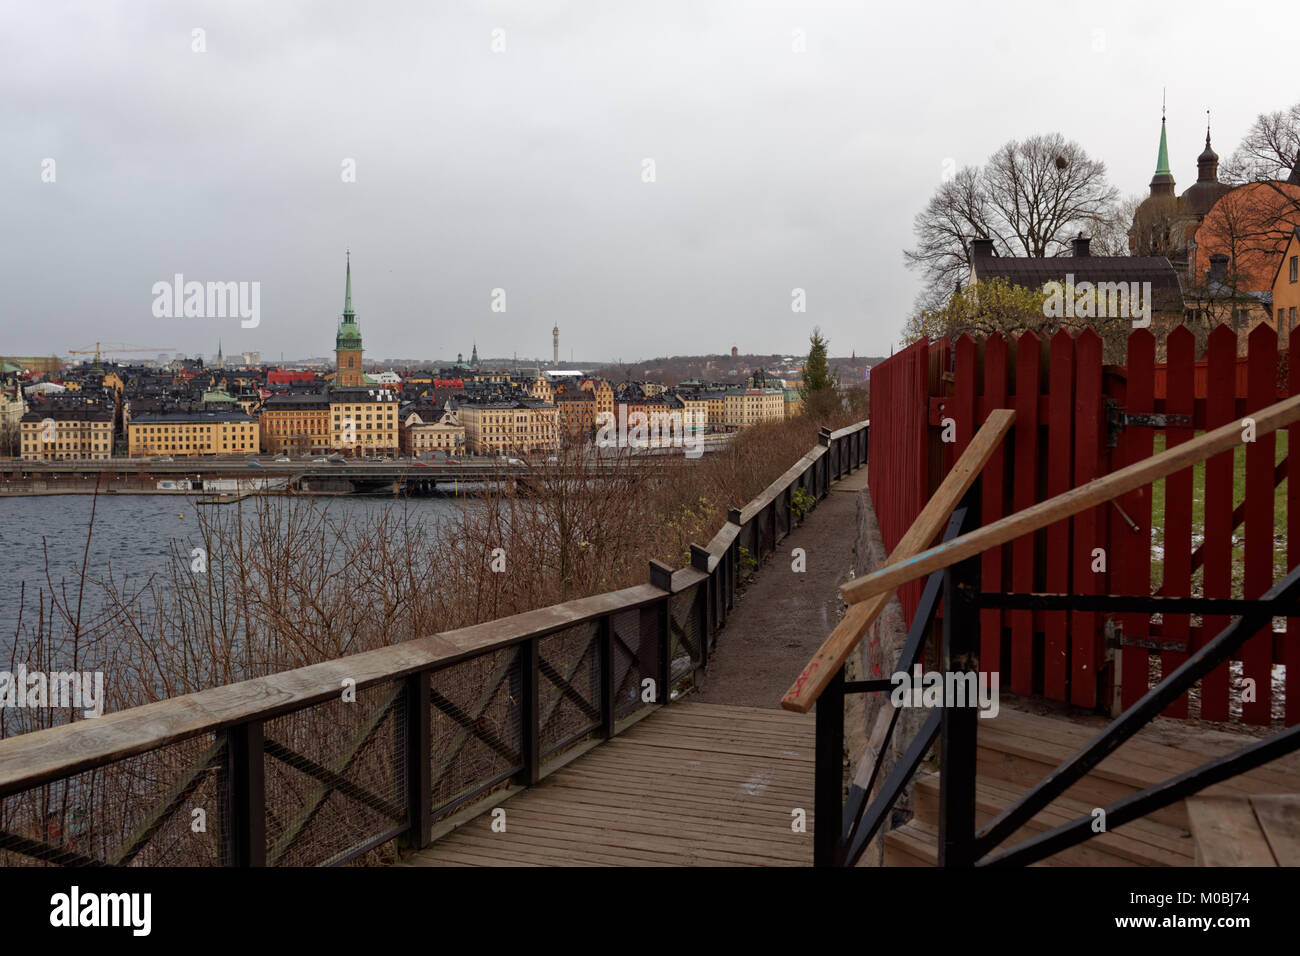 Monteliusvagen in Stockholm, Sweden in an autumn day. This 500-meter long walking path offers a magnificent view of Lake Malaren, City Hall, and Ridda Stock Photo